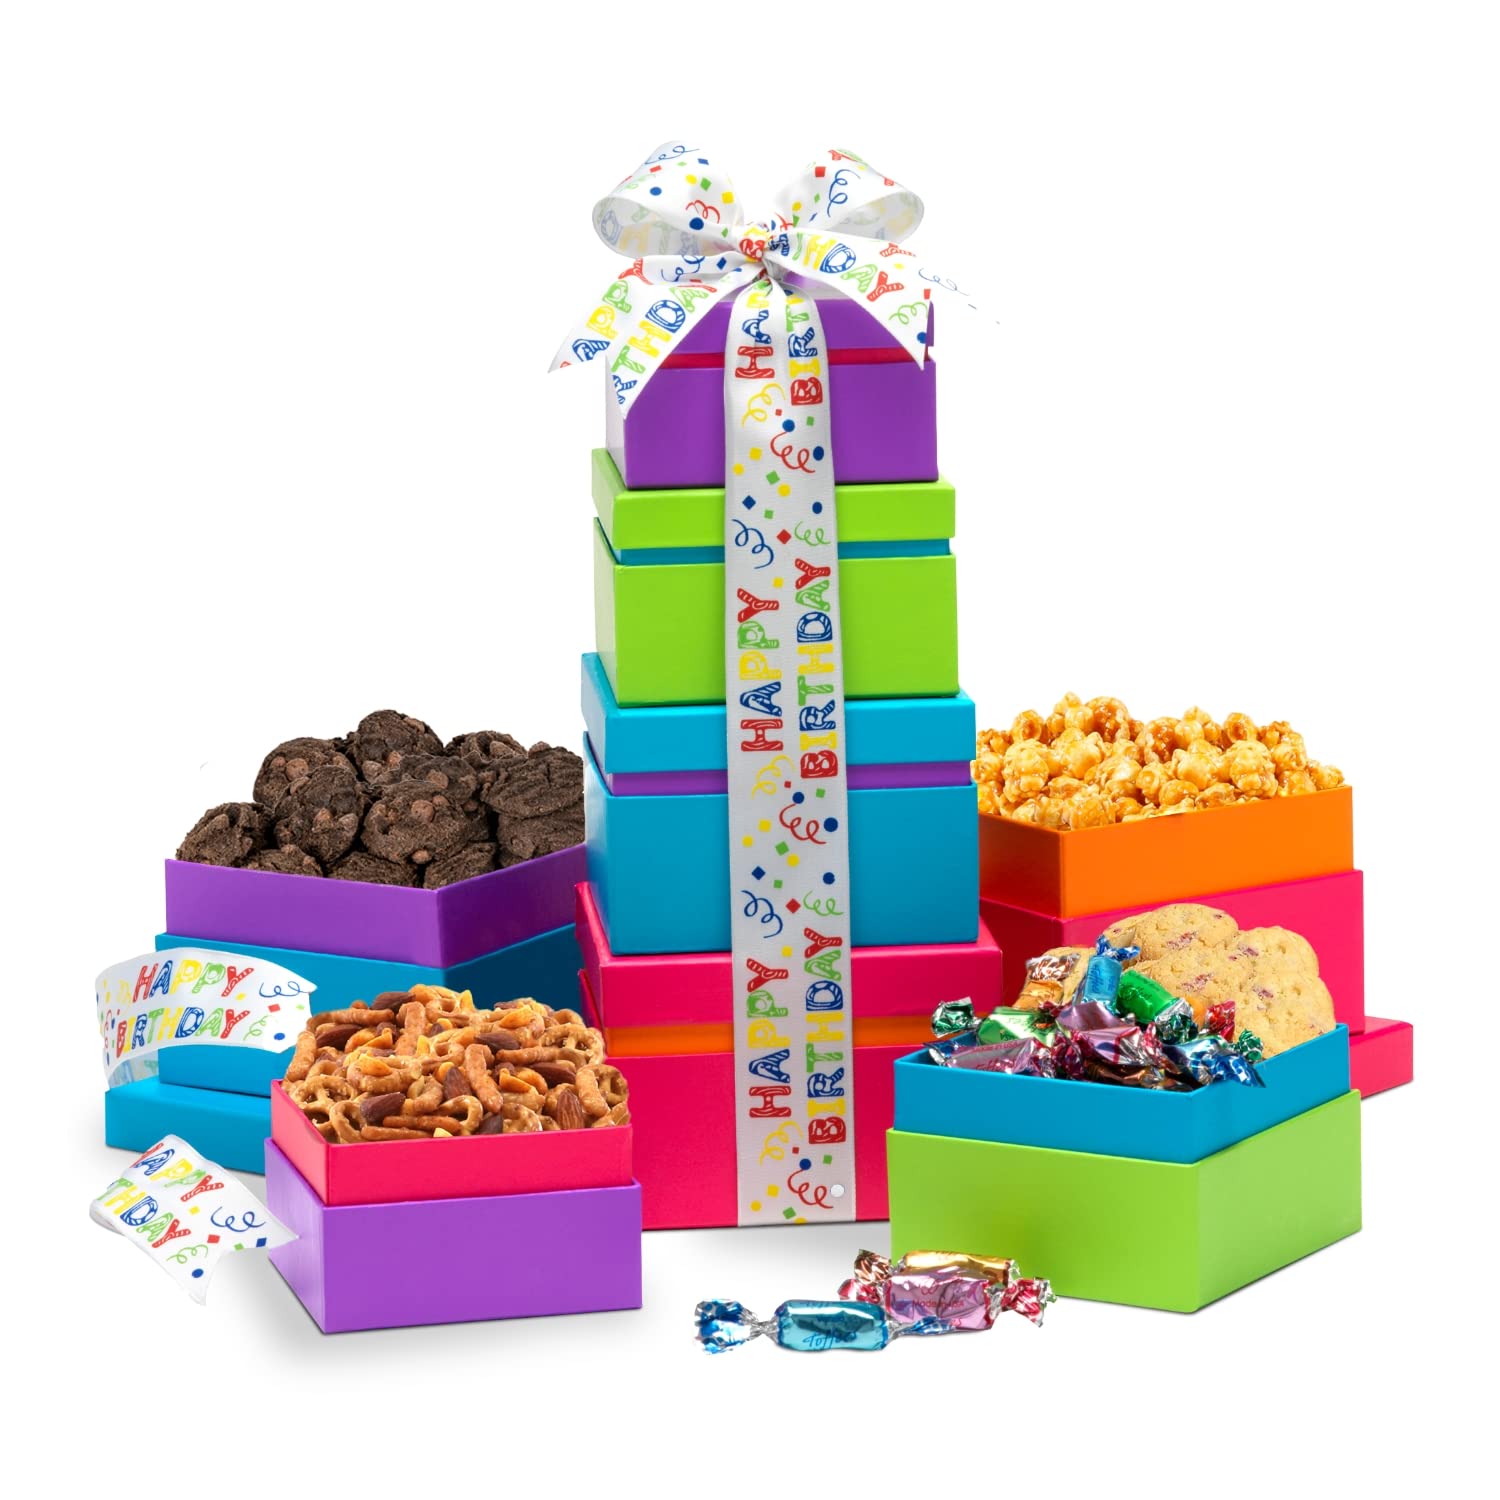 Broadway Basketeers Gourmet Food Gift Basket 4 Box Tower for Birthdays  Curated Snack Box, Sweet and Savory Treats for Parties, Best Wishes,  Birthday Presents for Women, Men, Mom, Dad, Her, Him, Families